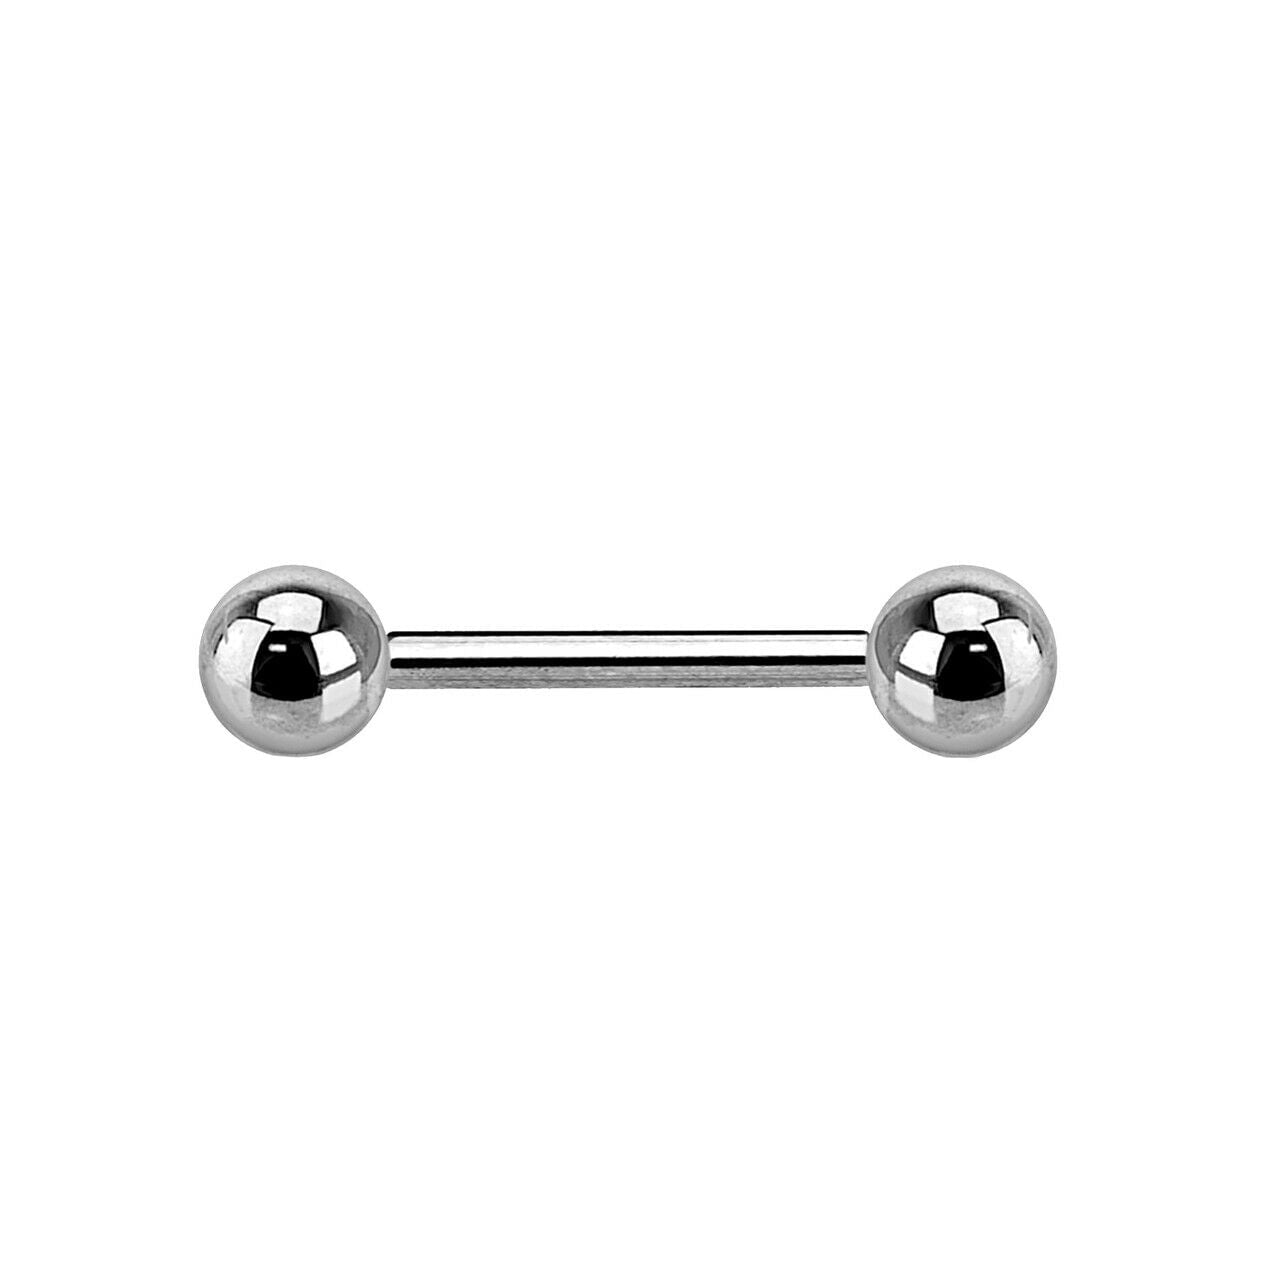 Painful Pleasures Threaded Taper for Ears, Piercing and Stretching Kit For  Navel, Nose, and Other Areas, Medical Grade Stainless Steel, 1 Inch Long,  3mm at Thickest Point, 8g with 2mm Threading 